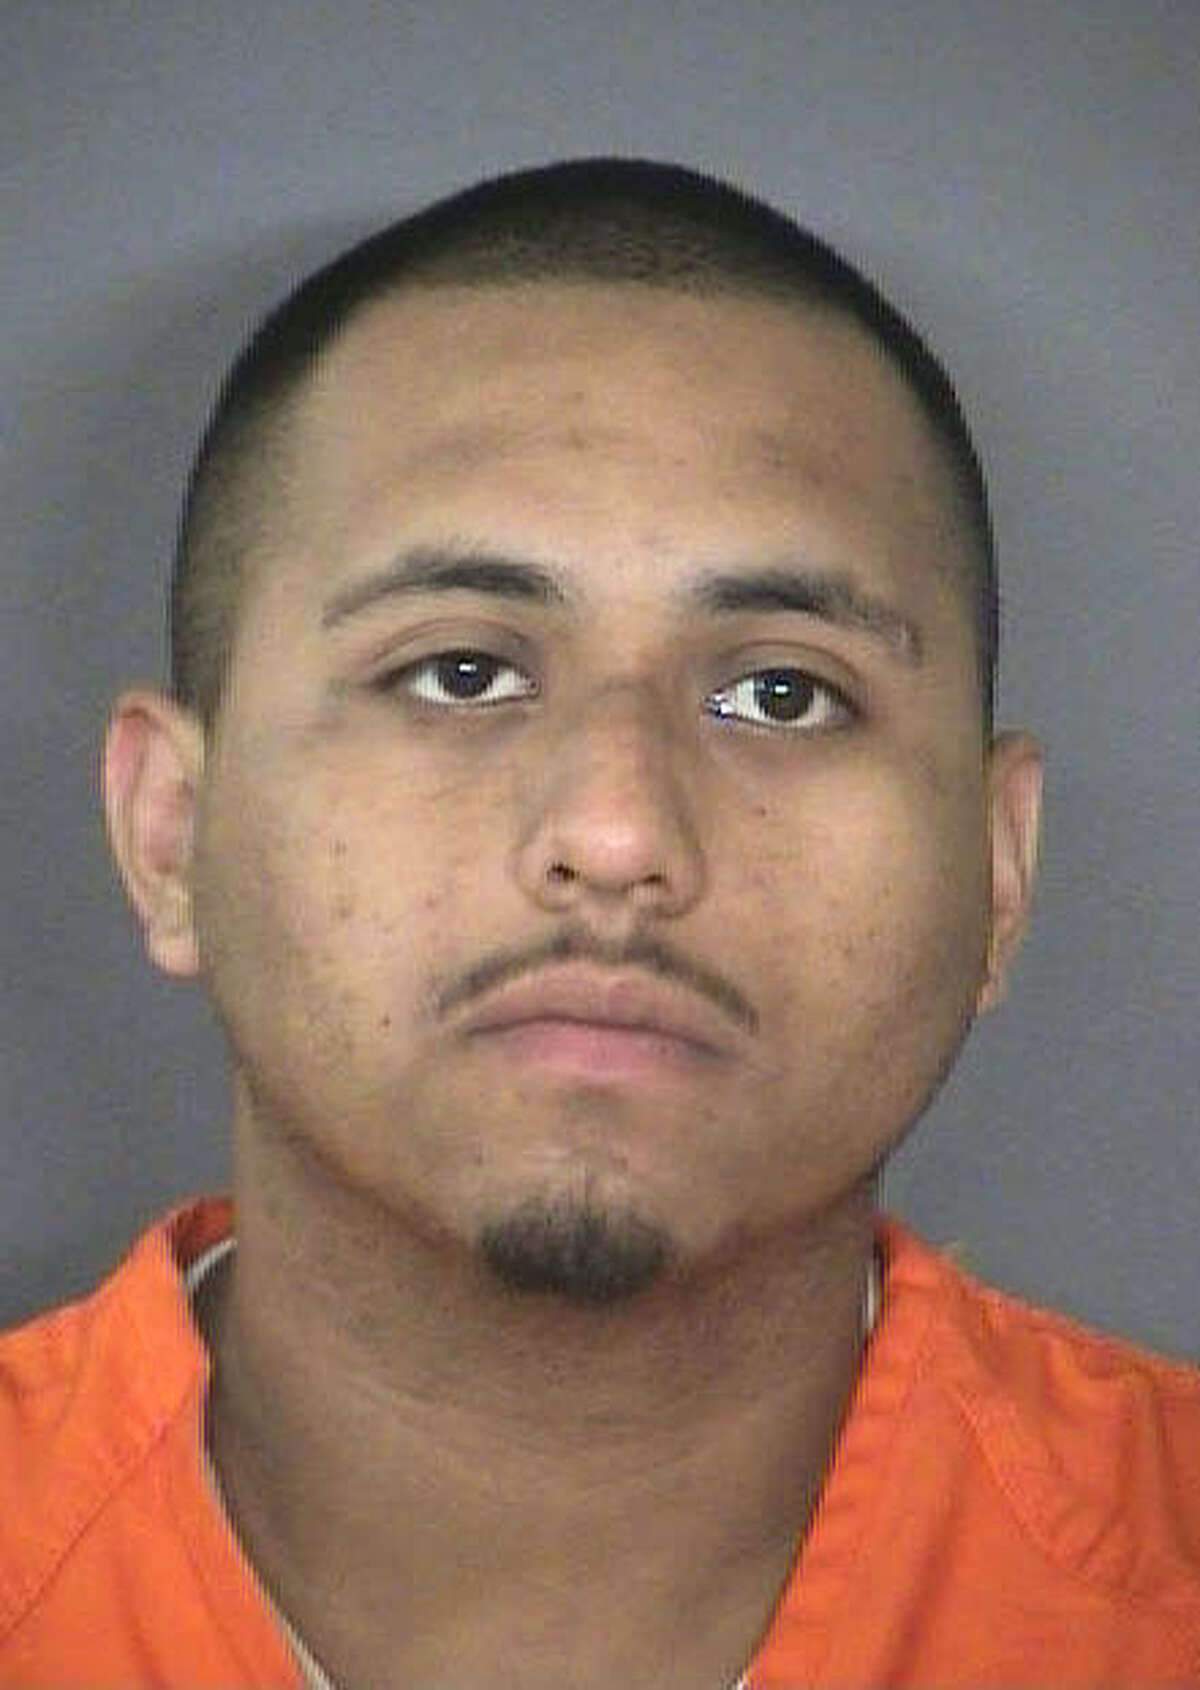 Inmate Accused Of Smuggling Razors